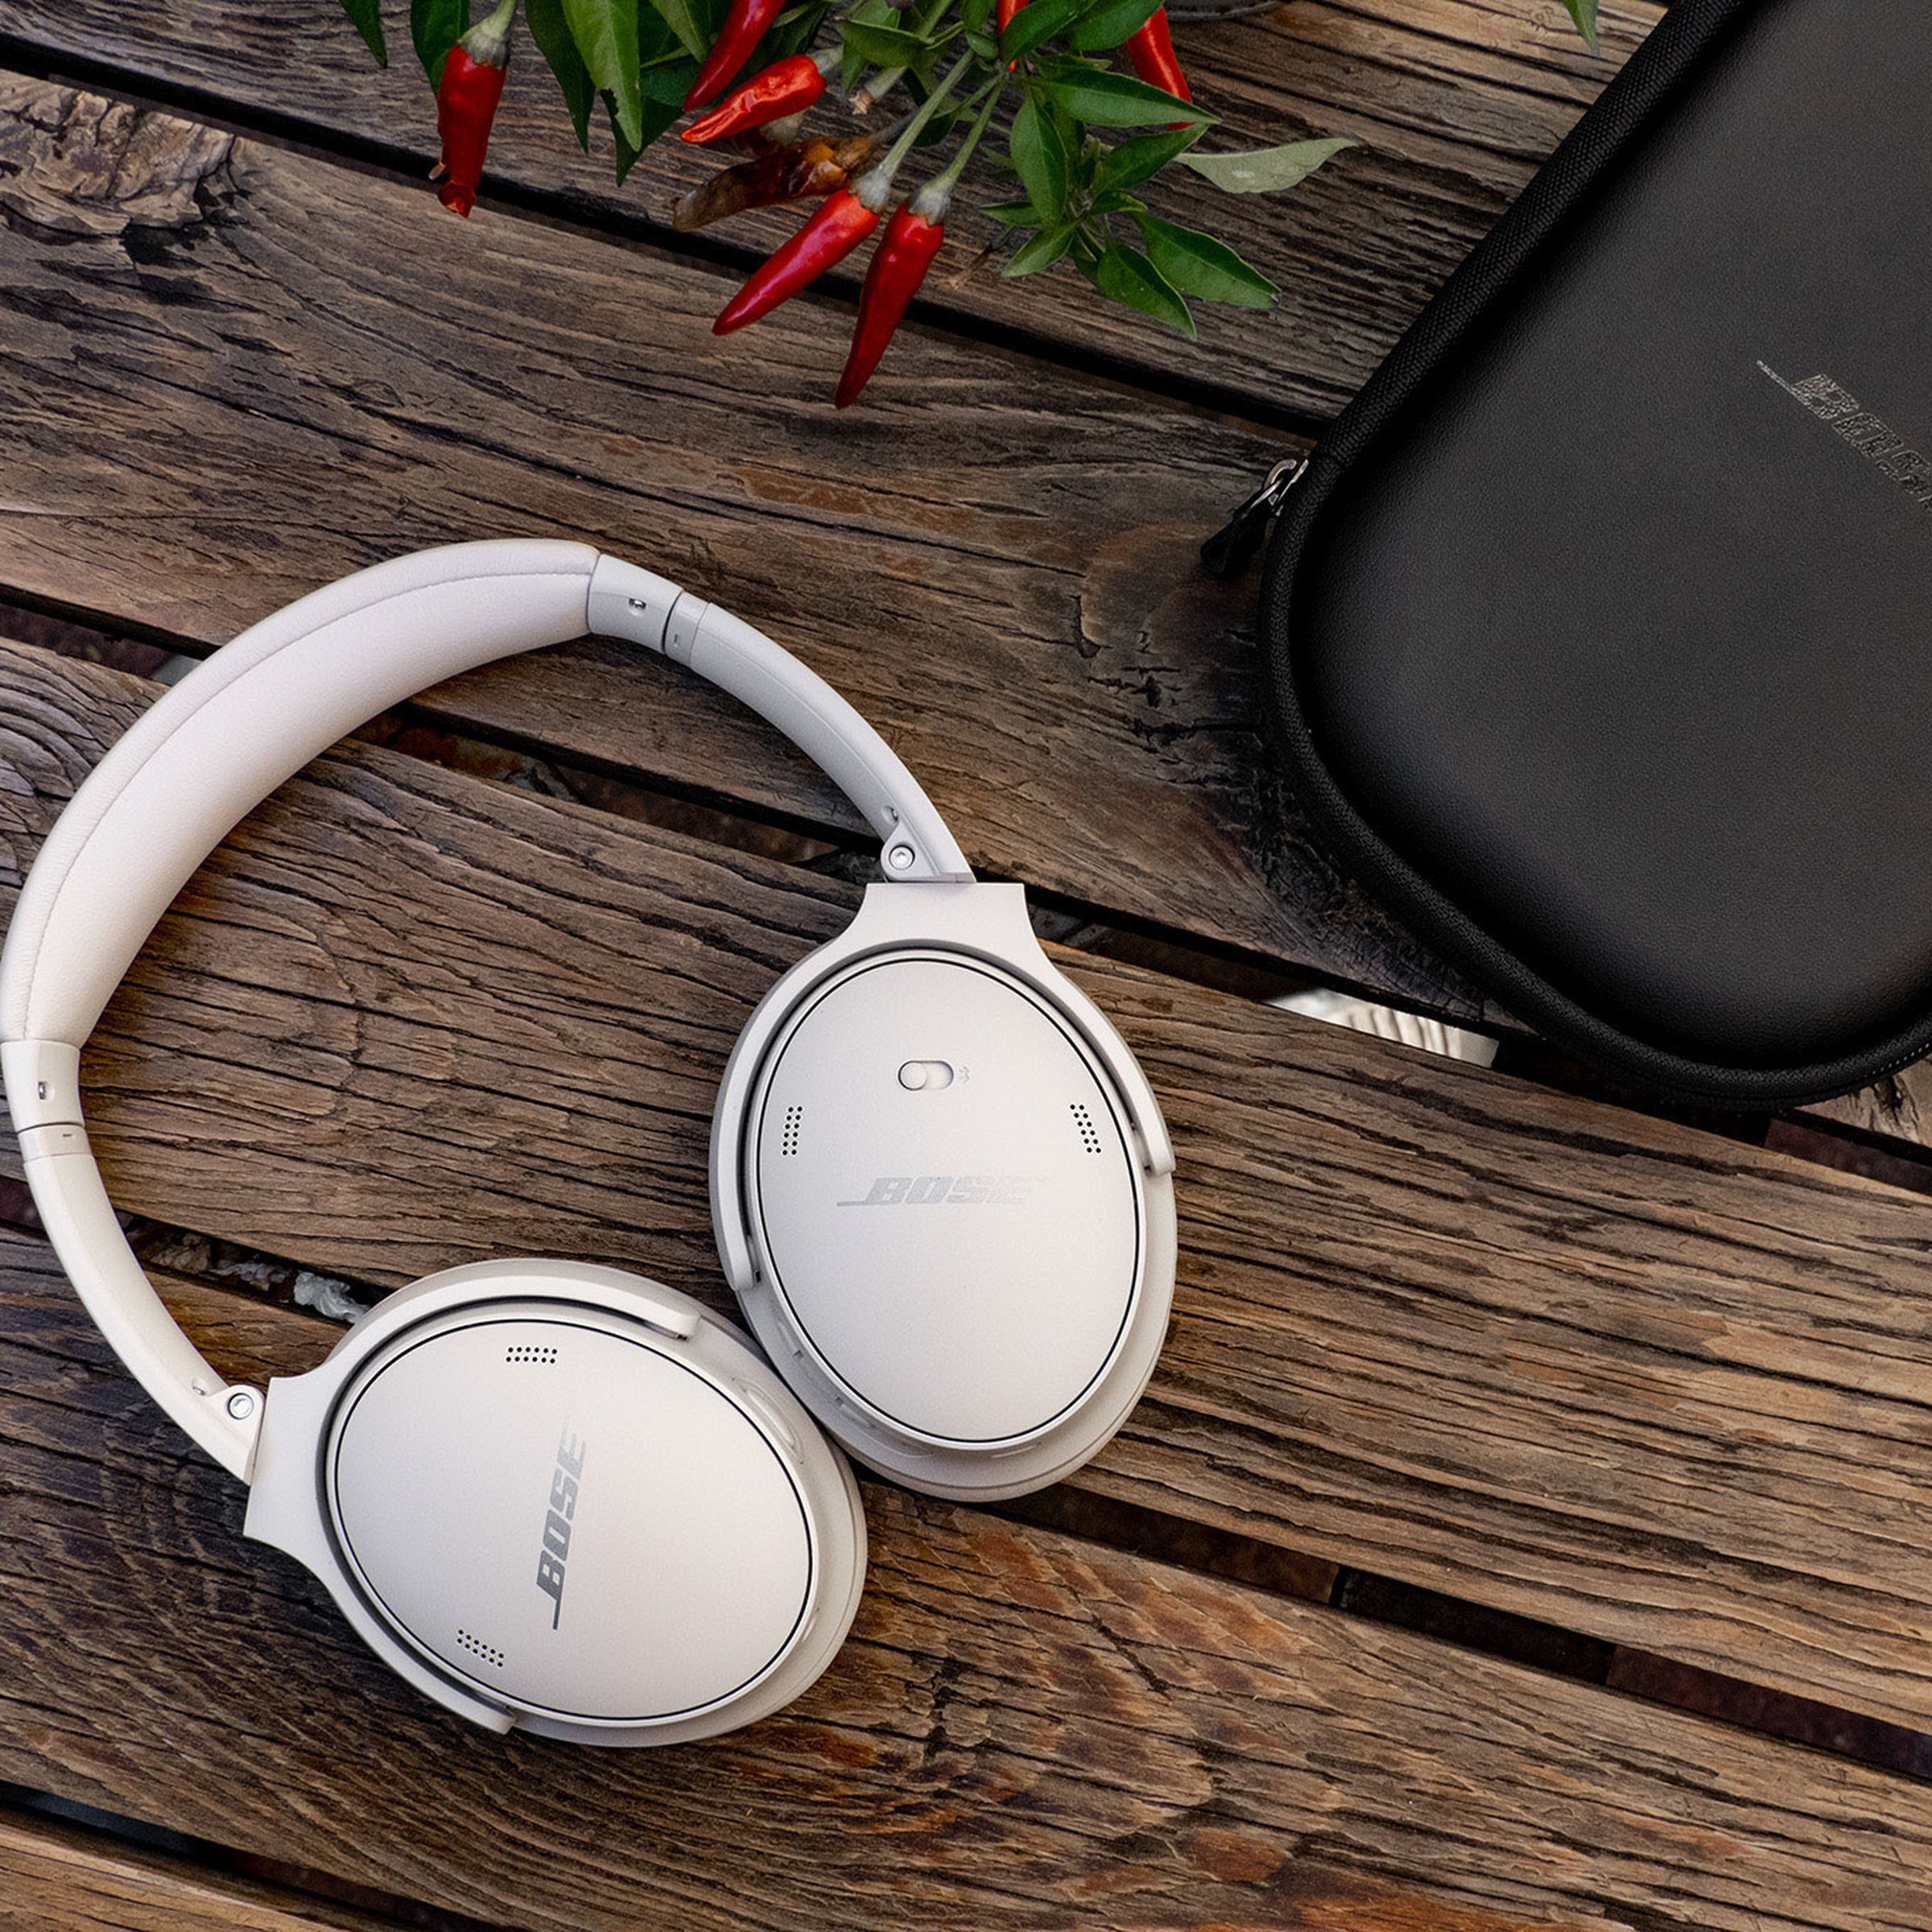 The white version of the Bose QuietComfort 45 headphones on a wood picnic table with their black protective zipper case beside them.